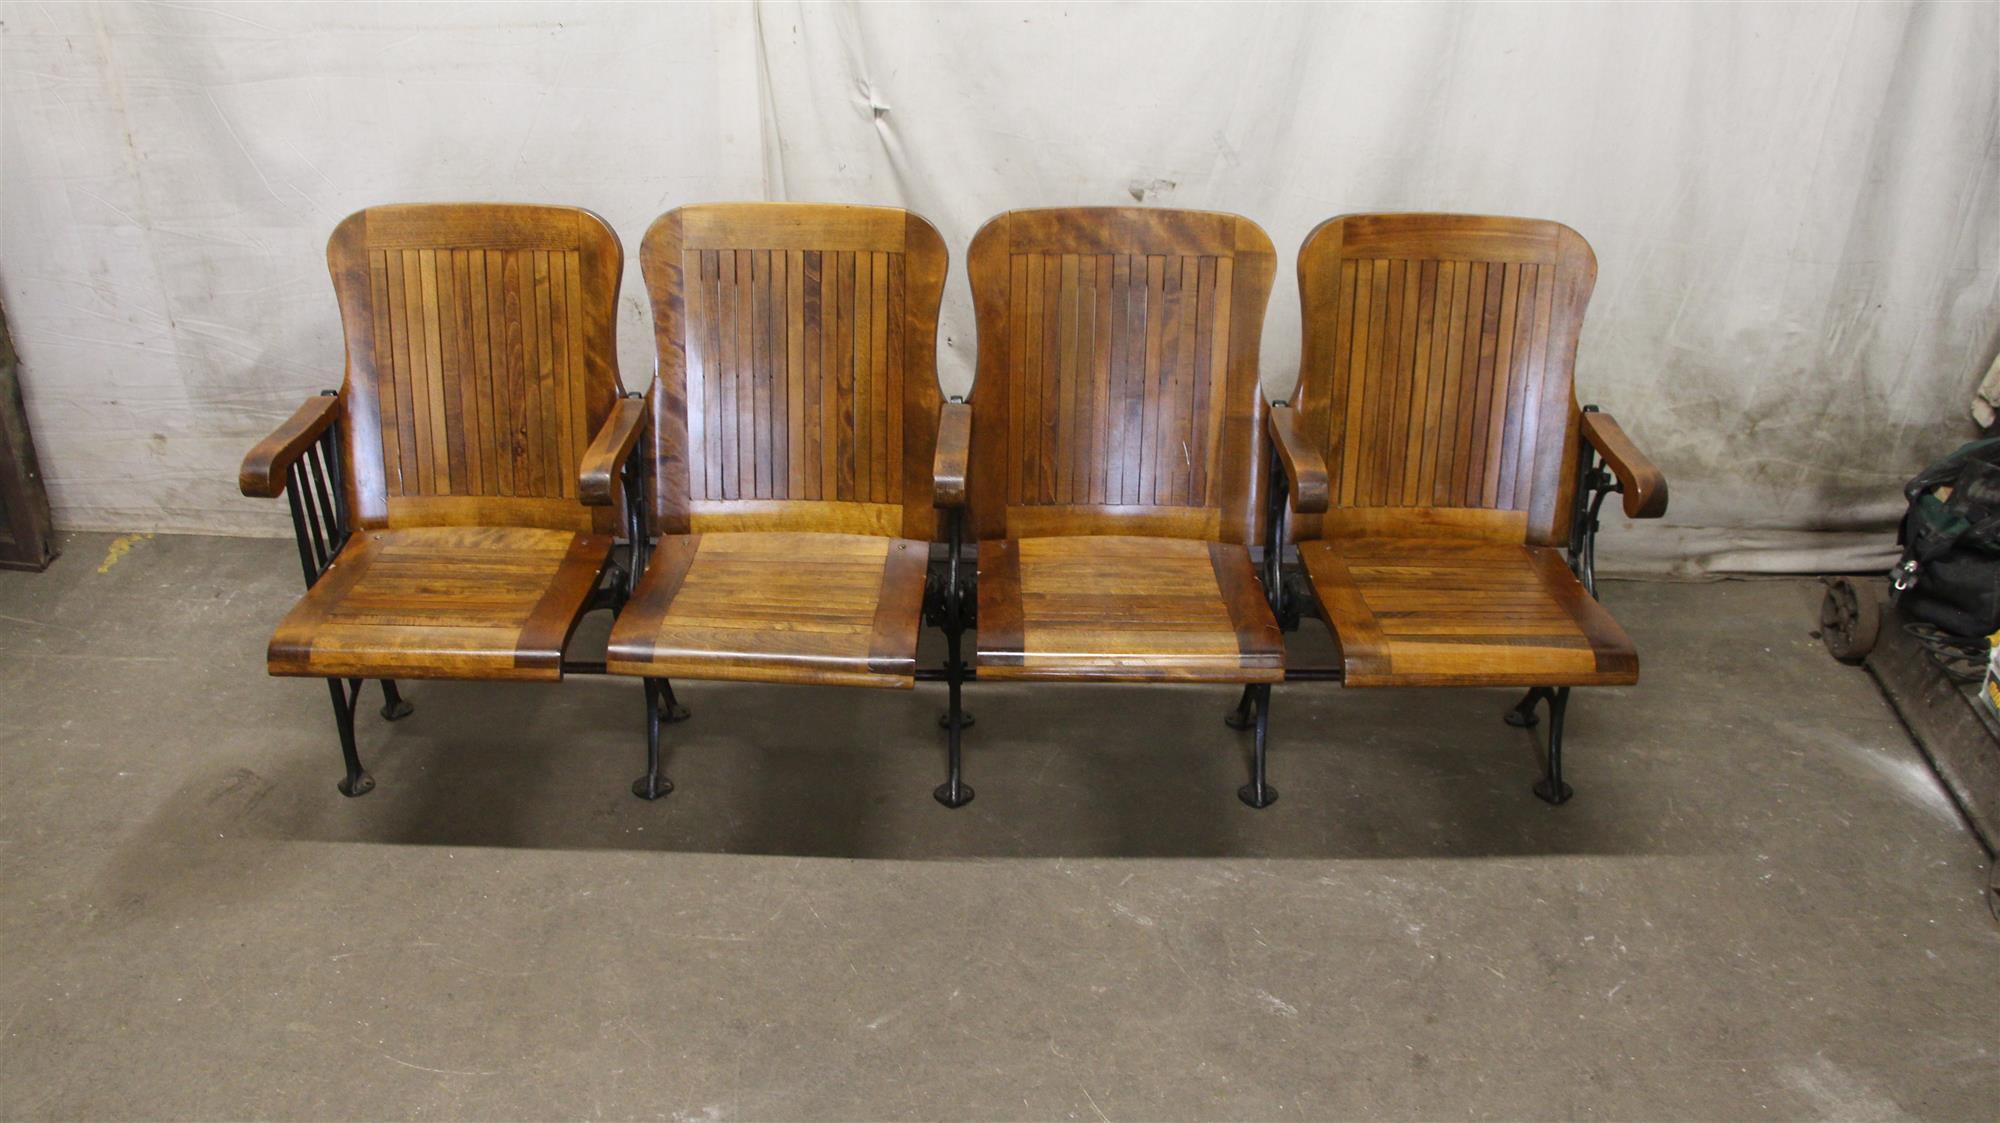 From Brooklyn 1905, folding theater seats. Ends may differ slightly due to being previously connected. Small quantity available at time of posting. Priced each set. Sets of two or three also available. Please inquire. This can be viewed at our